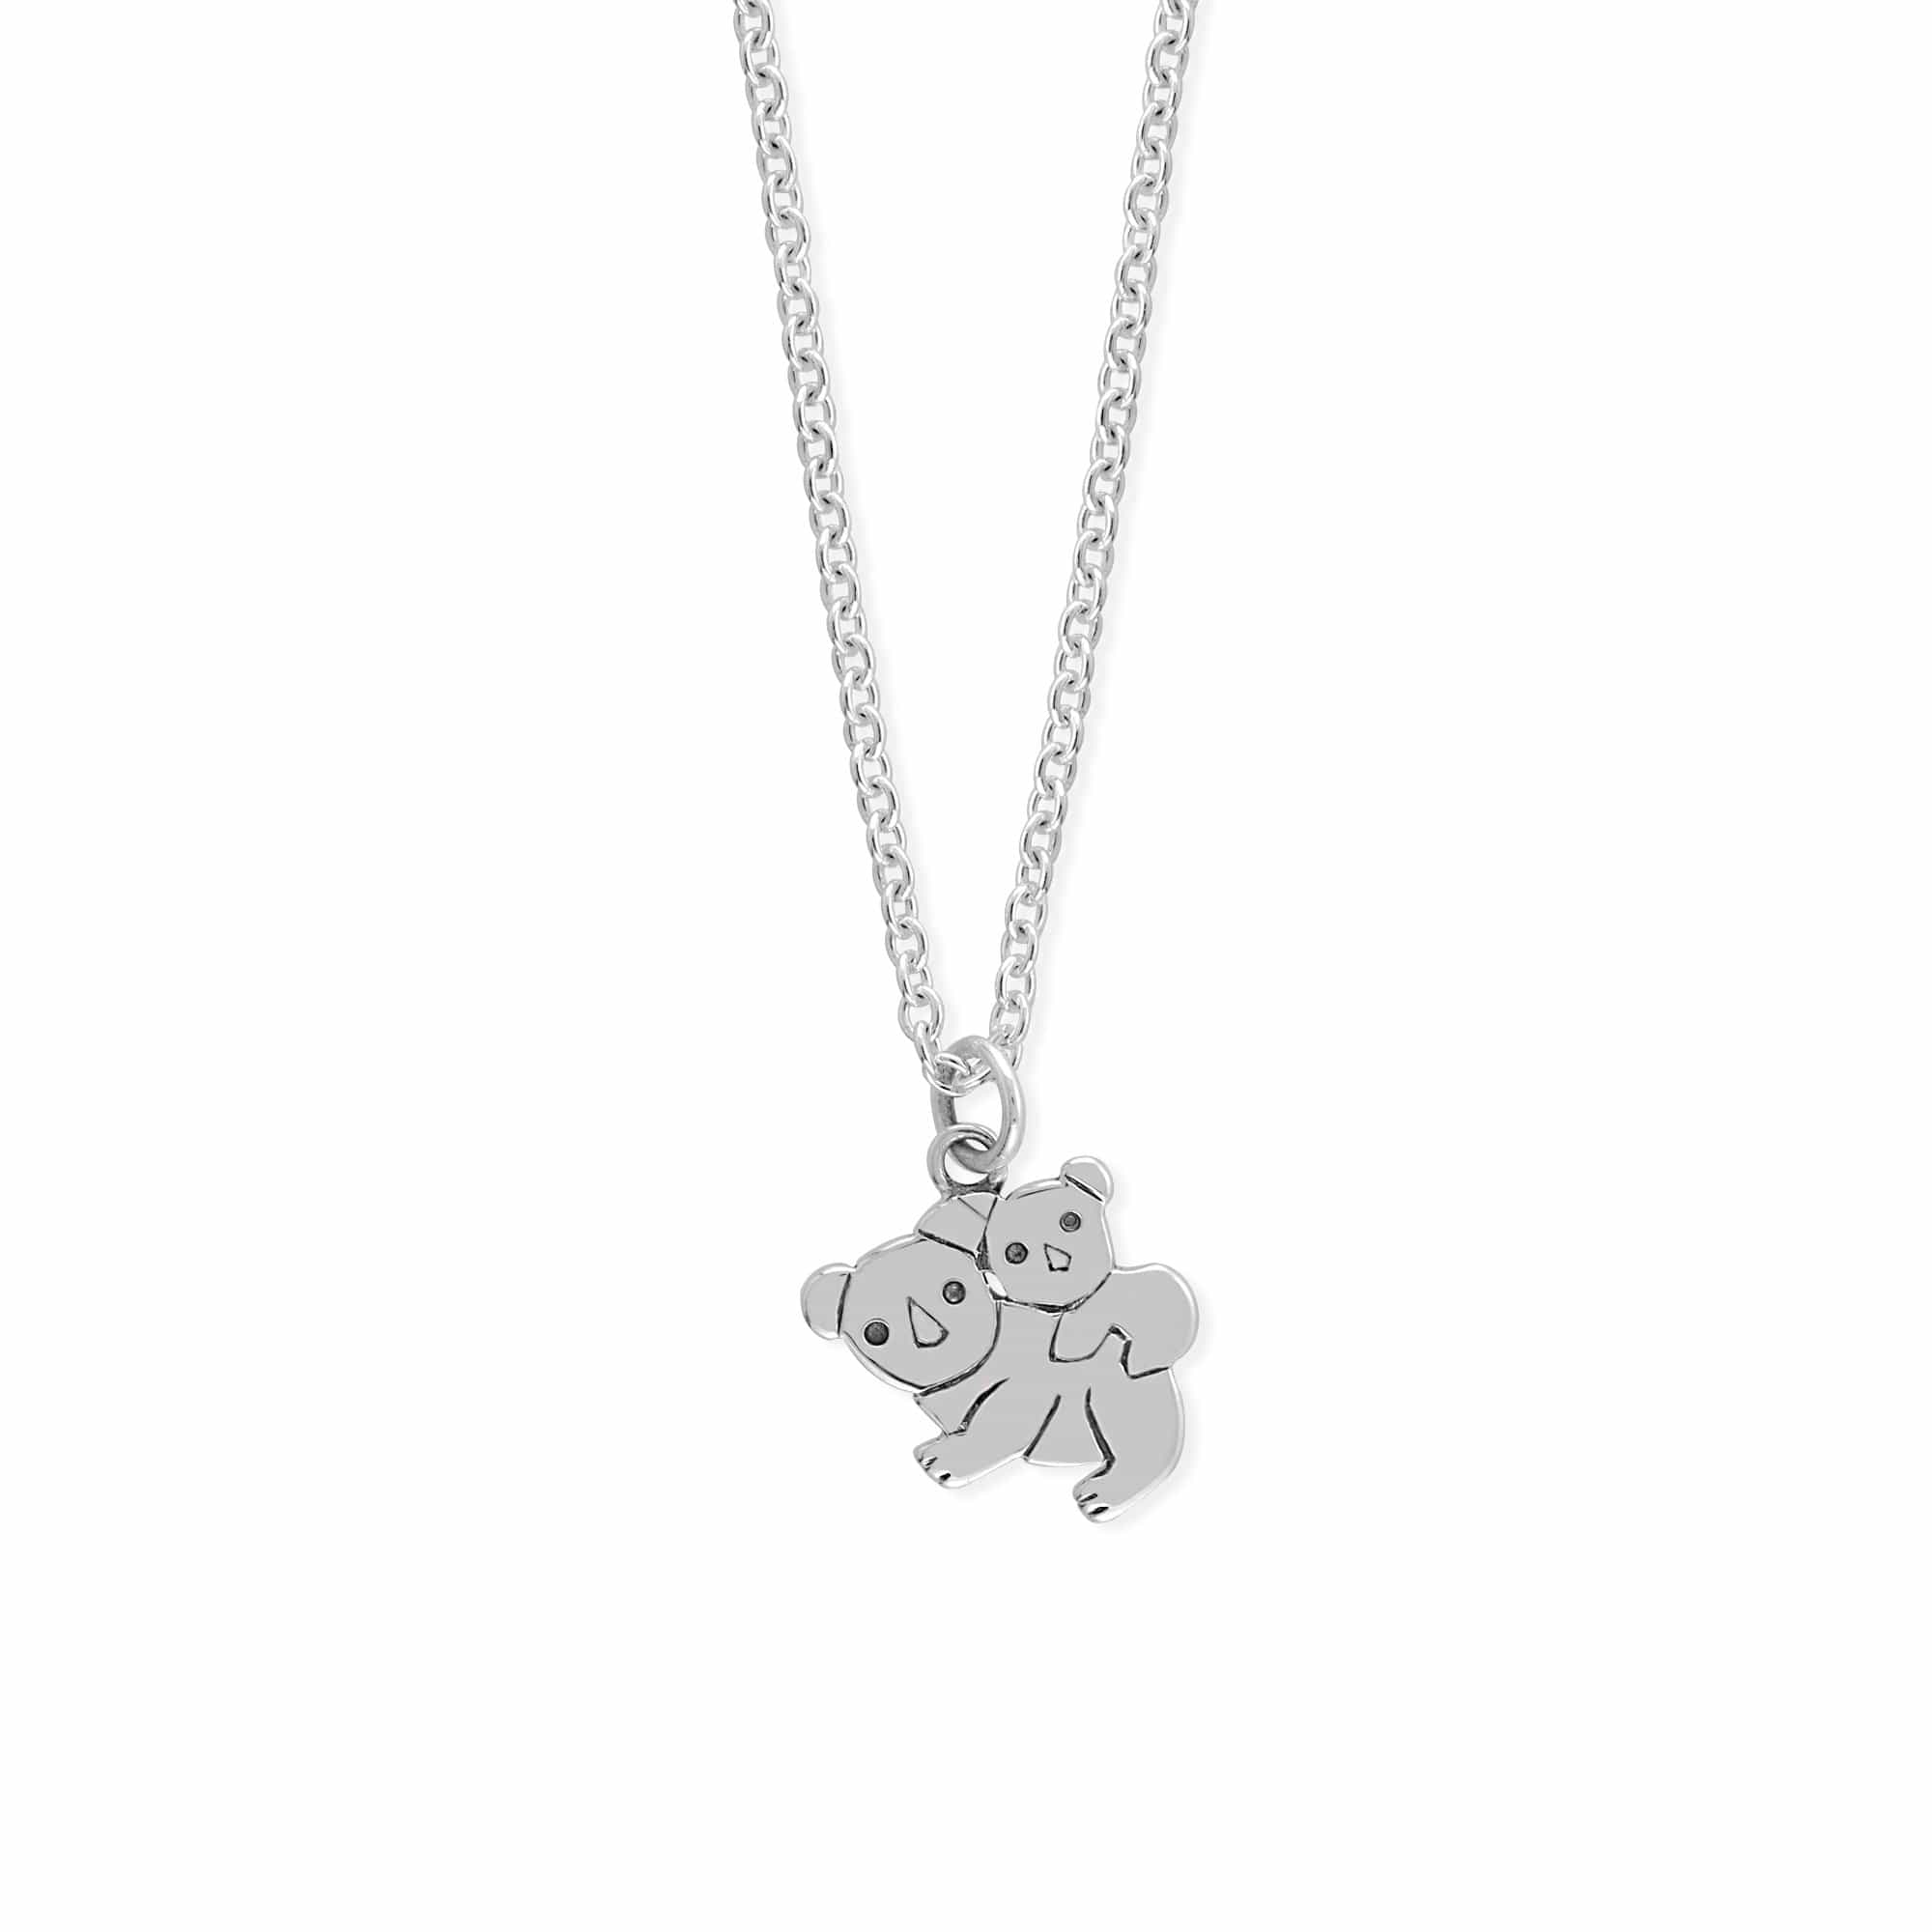 Boma Jewelry Necklaces Koala Mom and Me Necklace